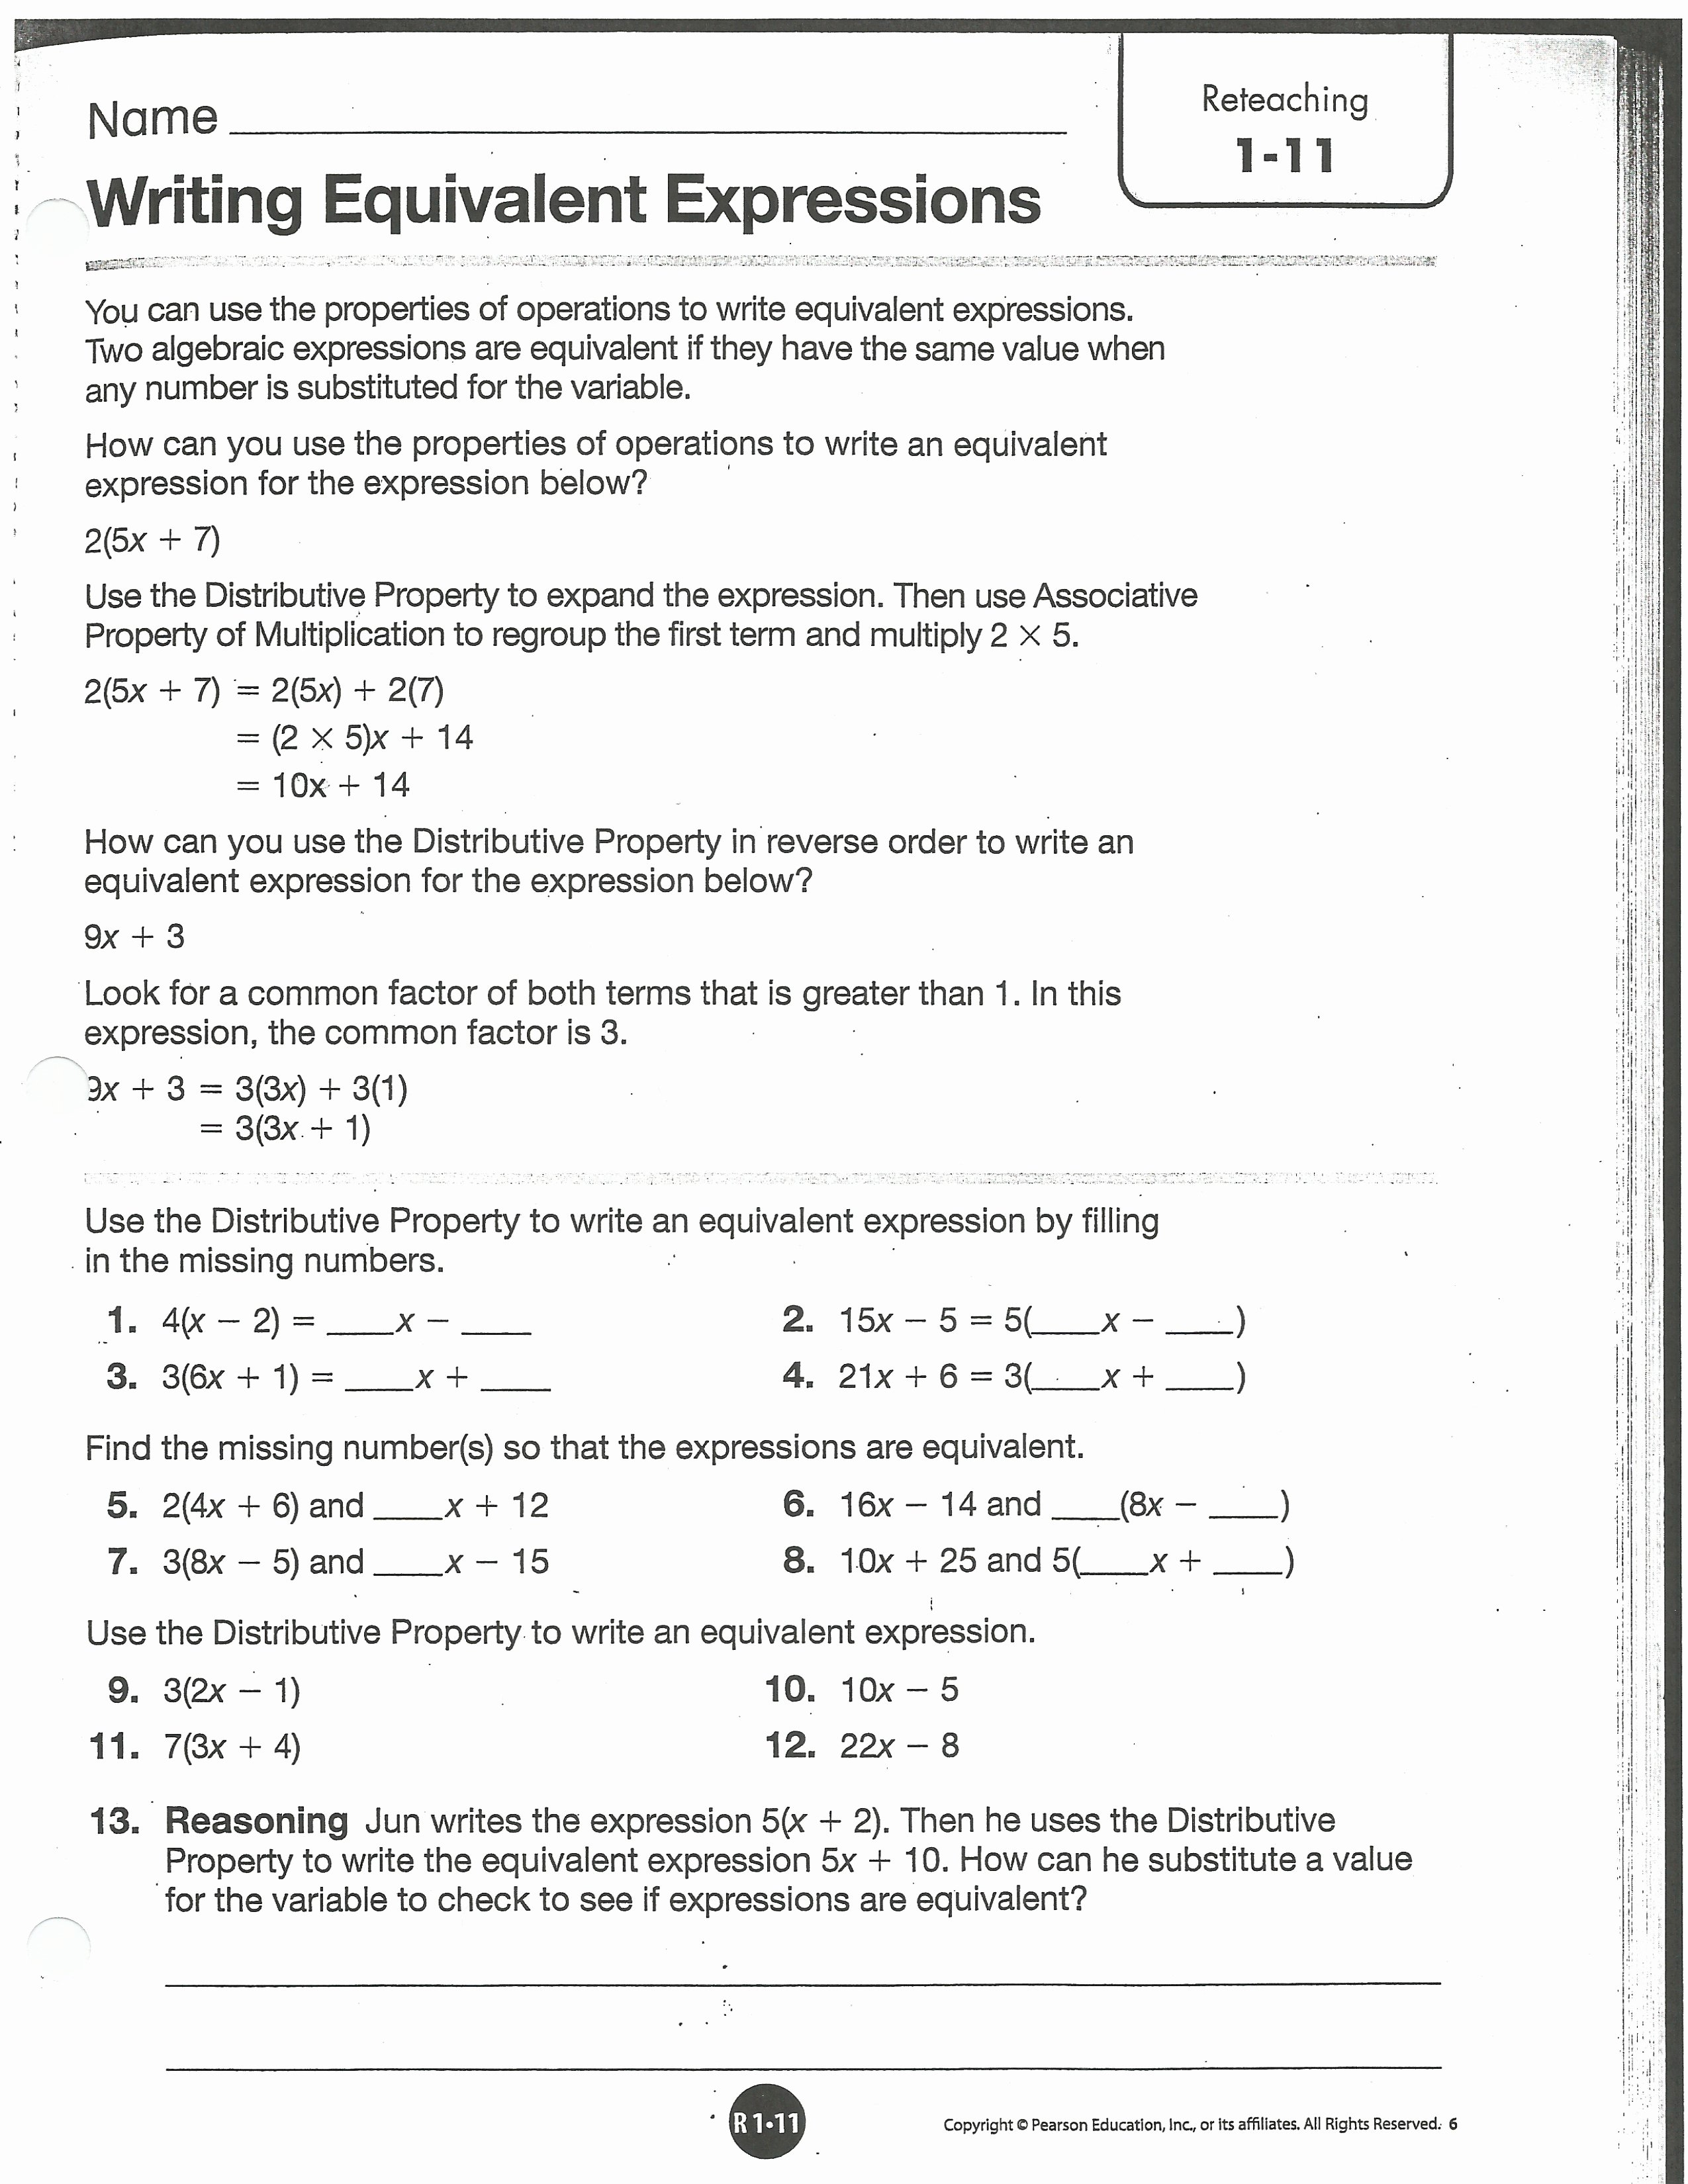 Writing and Evaluating Expressions Worksheet Elegant Writing and Evaluating Expressions Worksheet the Best